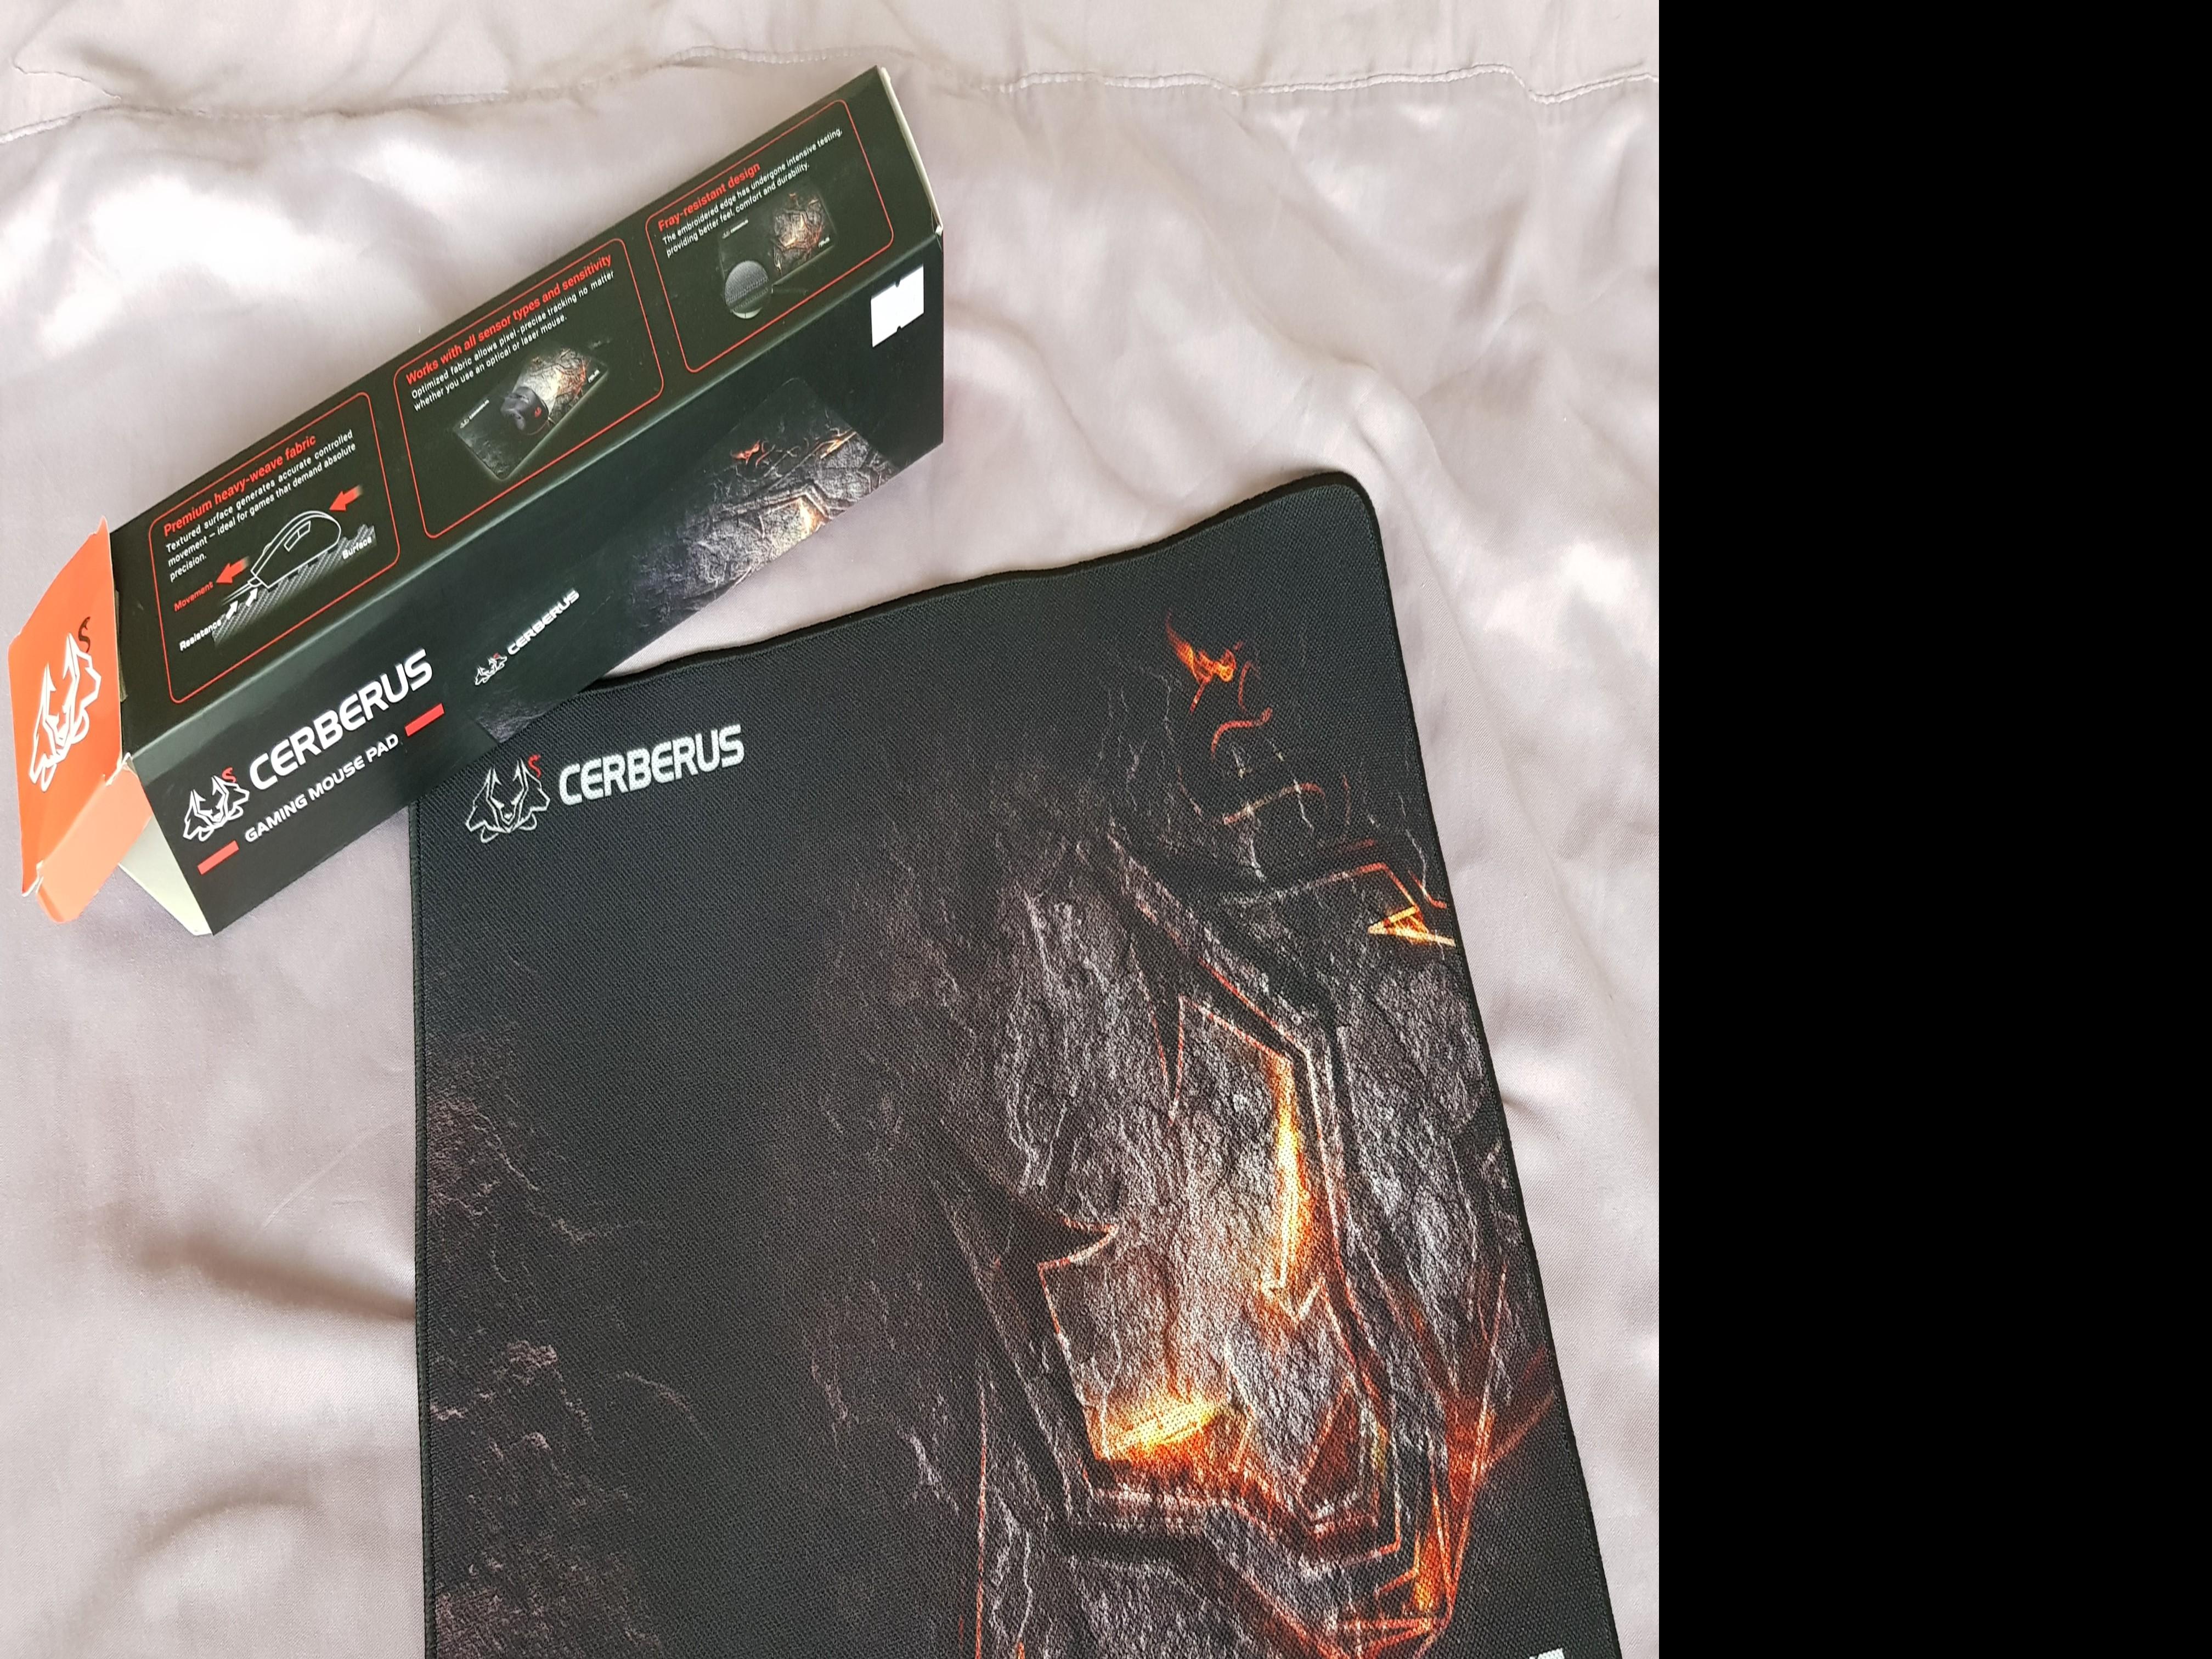 Cerberus Asus Mouse Pad Computers Tech Parts Accessories Mouse Mousepads On Carousell